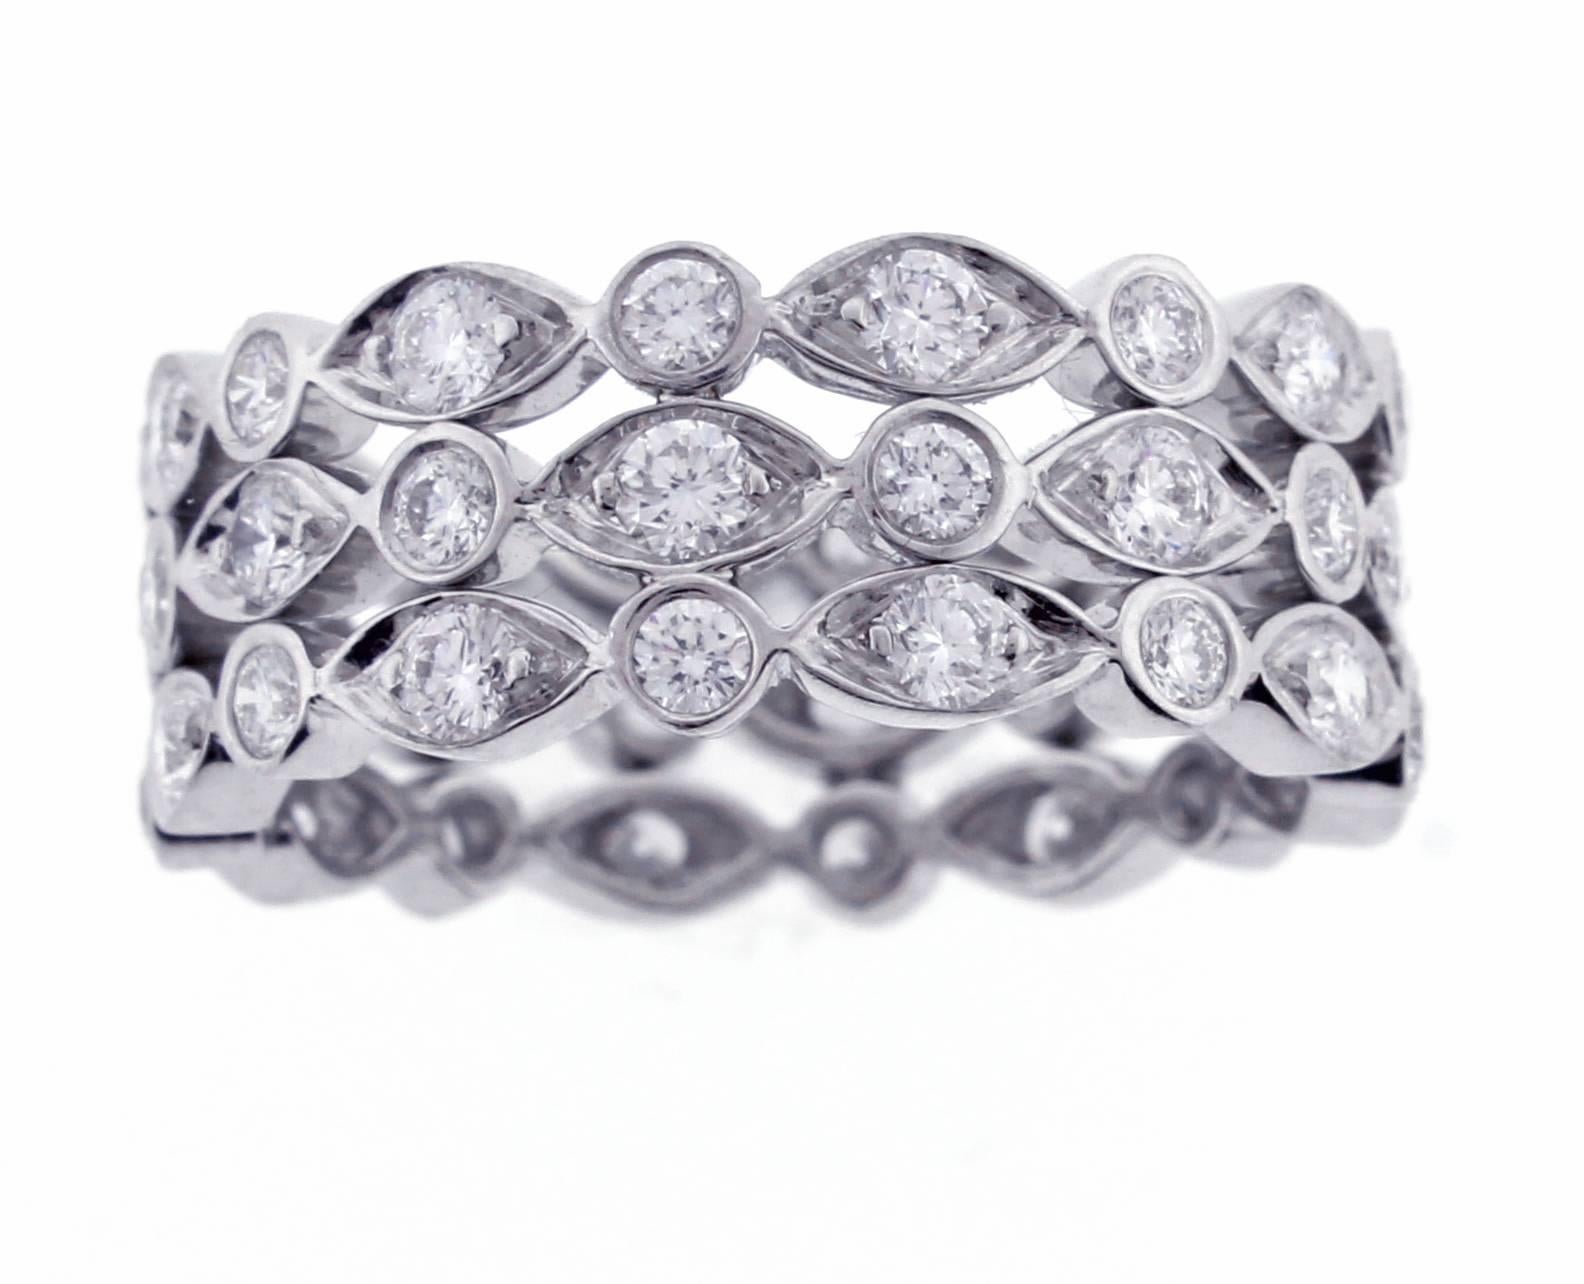 From the Jazz collection by Tiffany & Co., a three row diamond platinum band-ring. The ring is comprised of 48 brilliant diamonds weighing approximately 1.40 carats. 8mm wide, size 6 1/2. This is a new ring, never worn. 